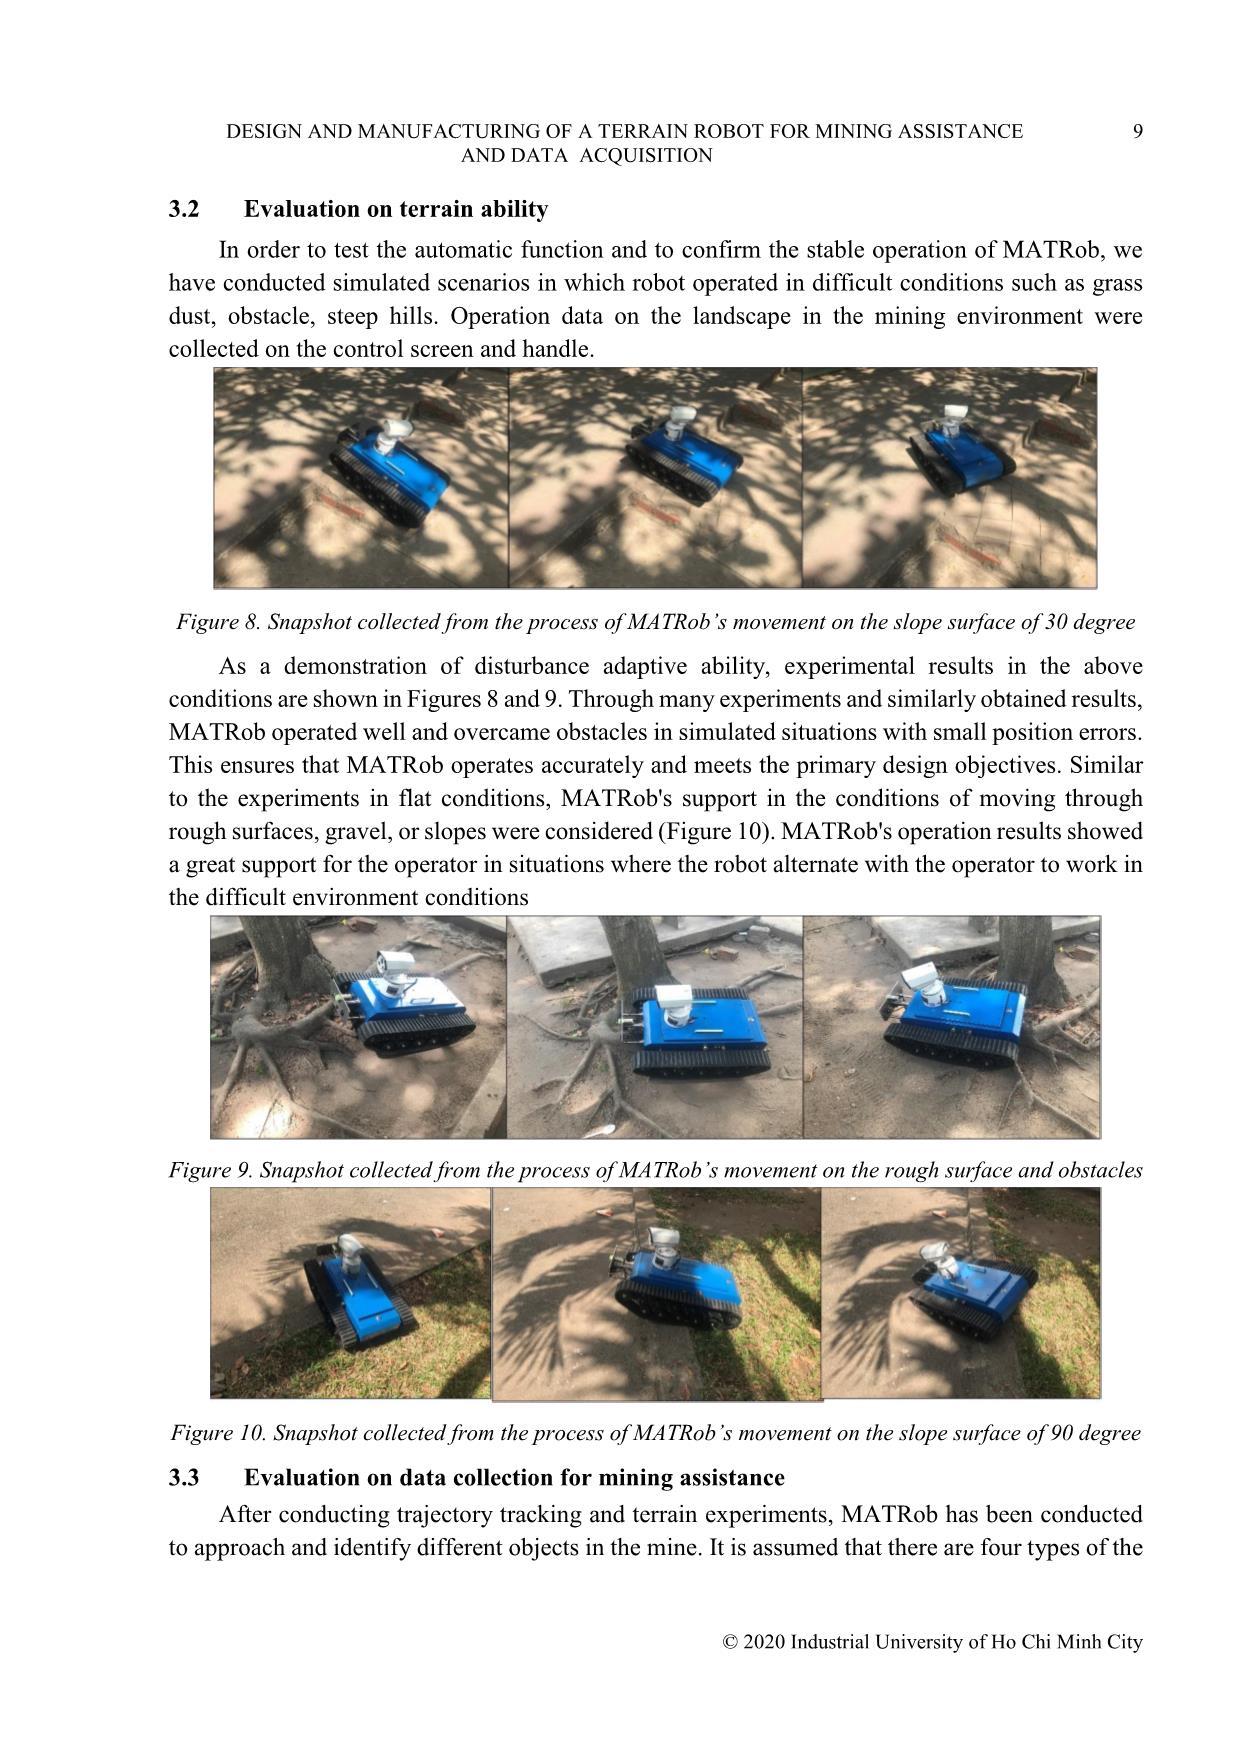 Design and manufacturing of a terrain robot for mining assistance and data acquisition trang 7